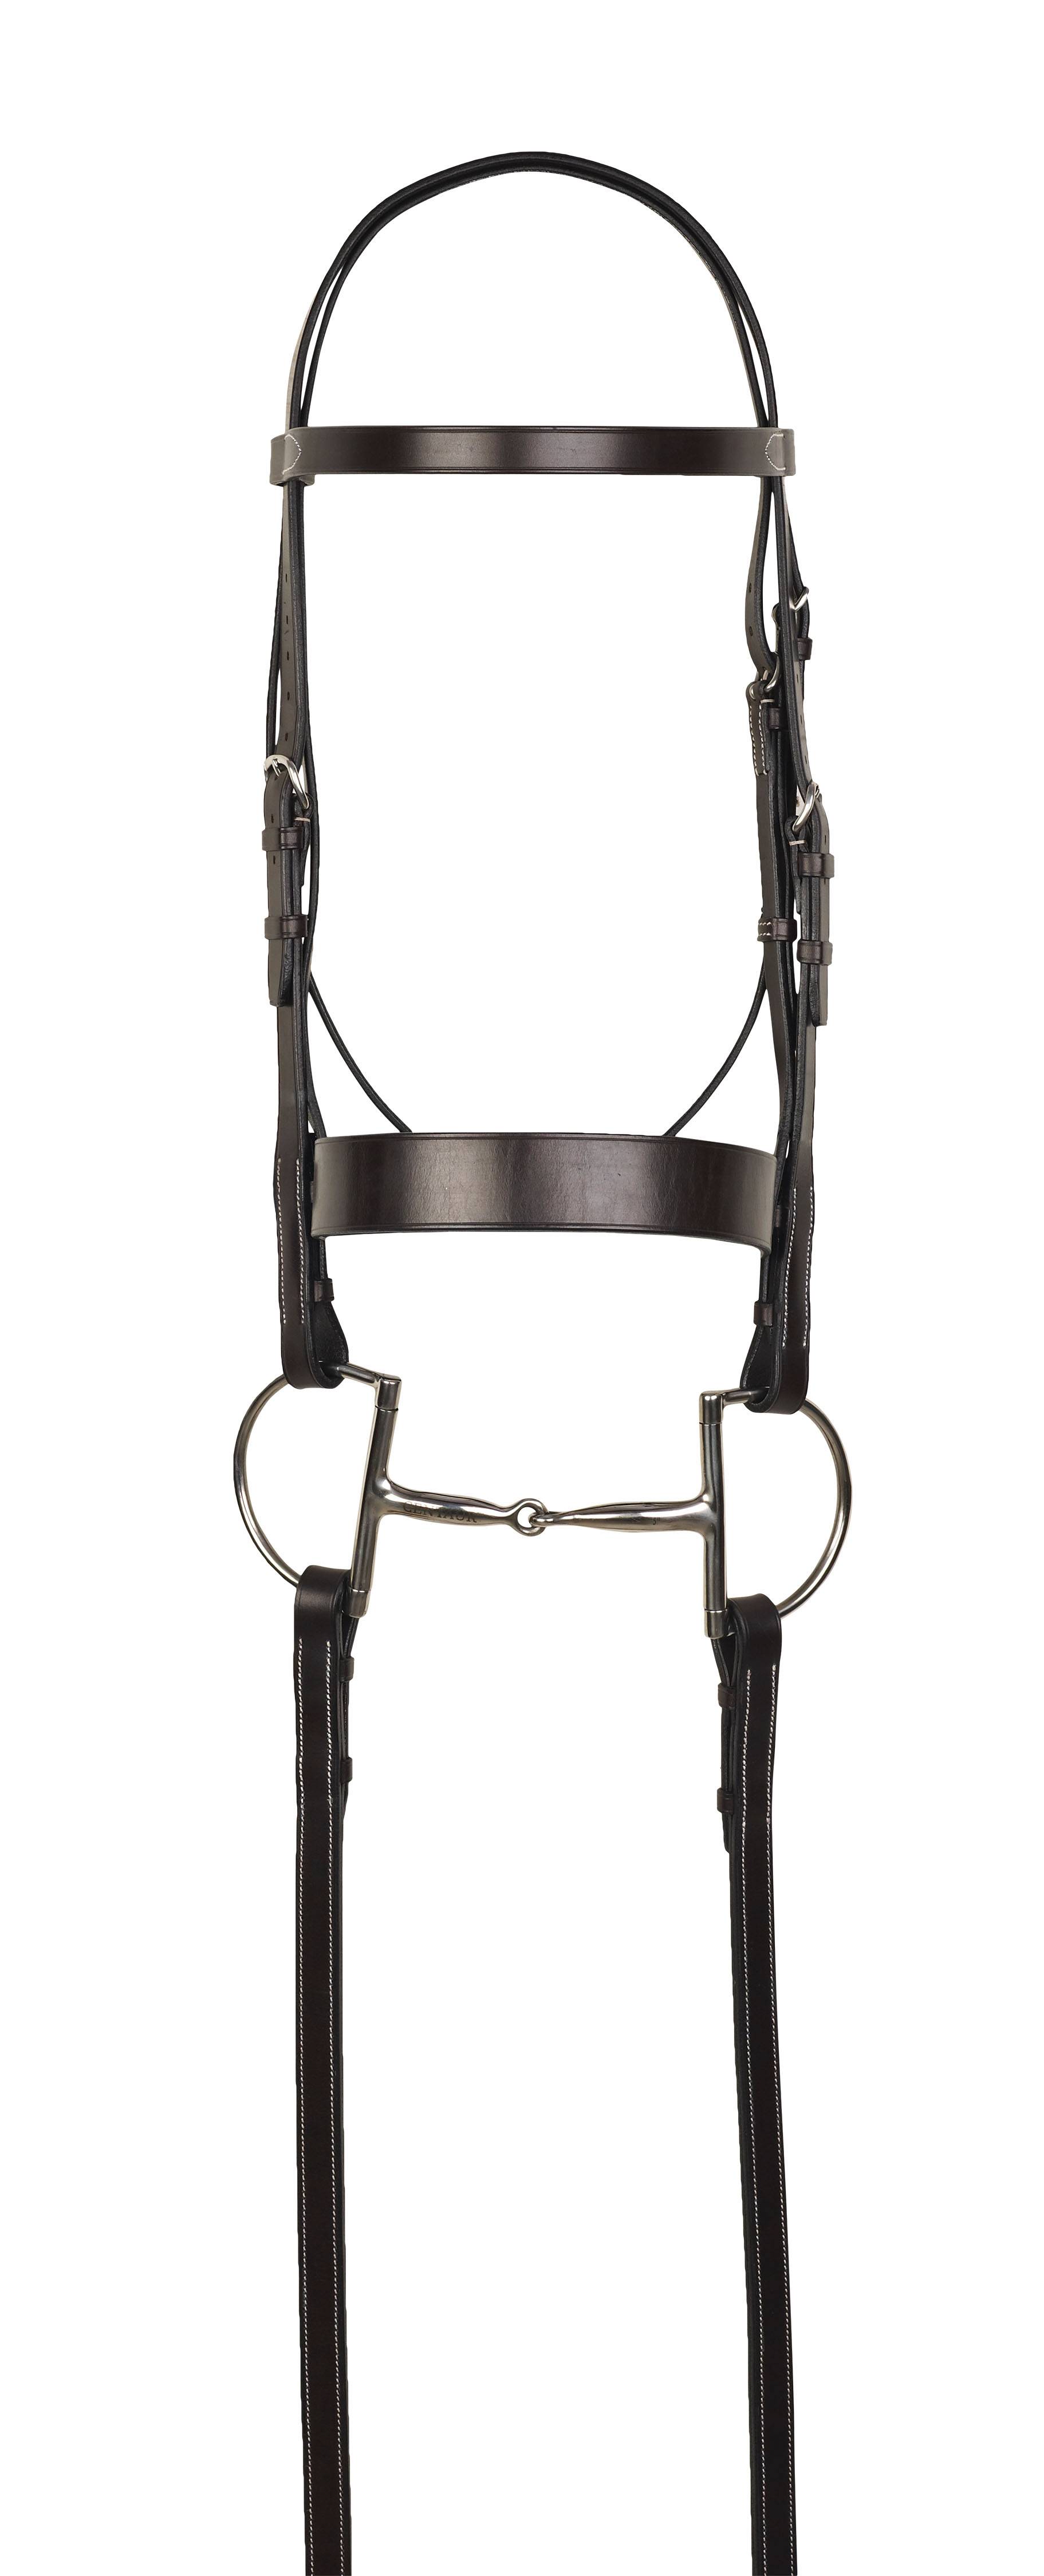 Aramas Flat Hunt Bridle with Lace Reins